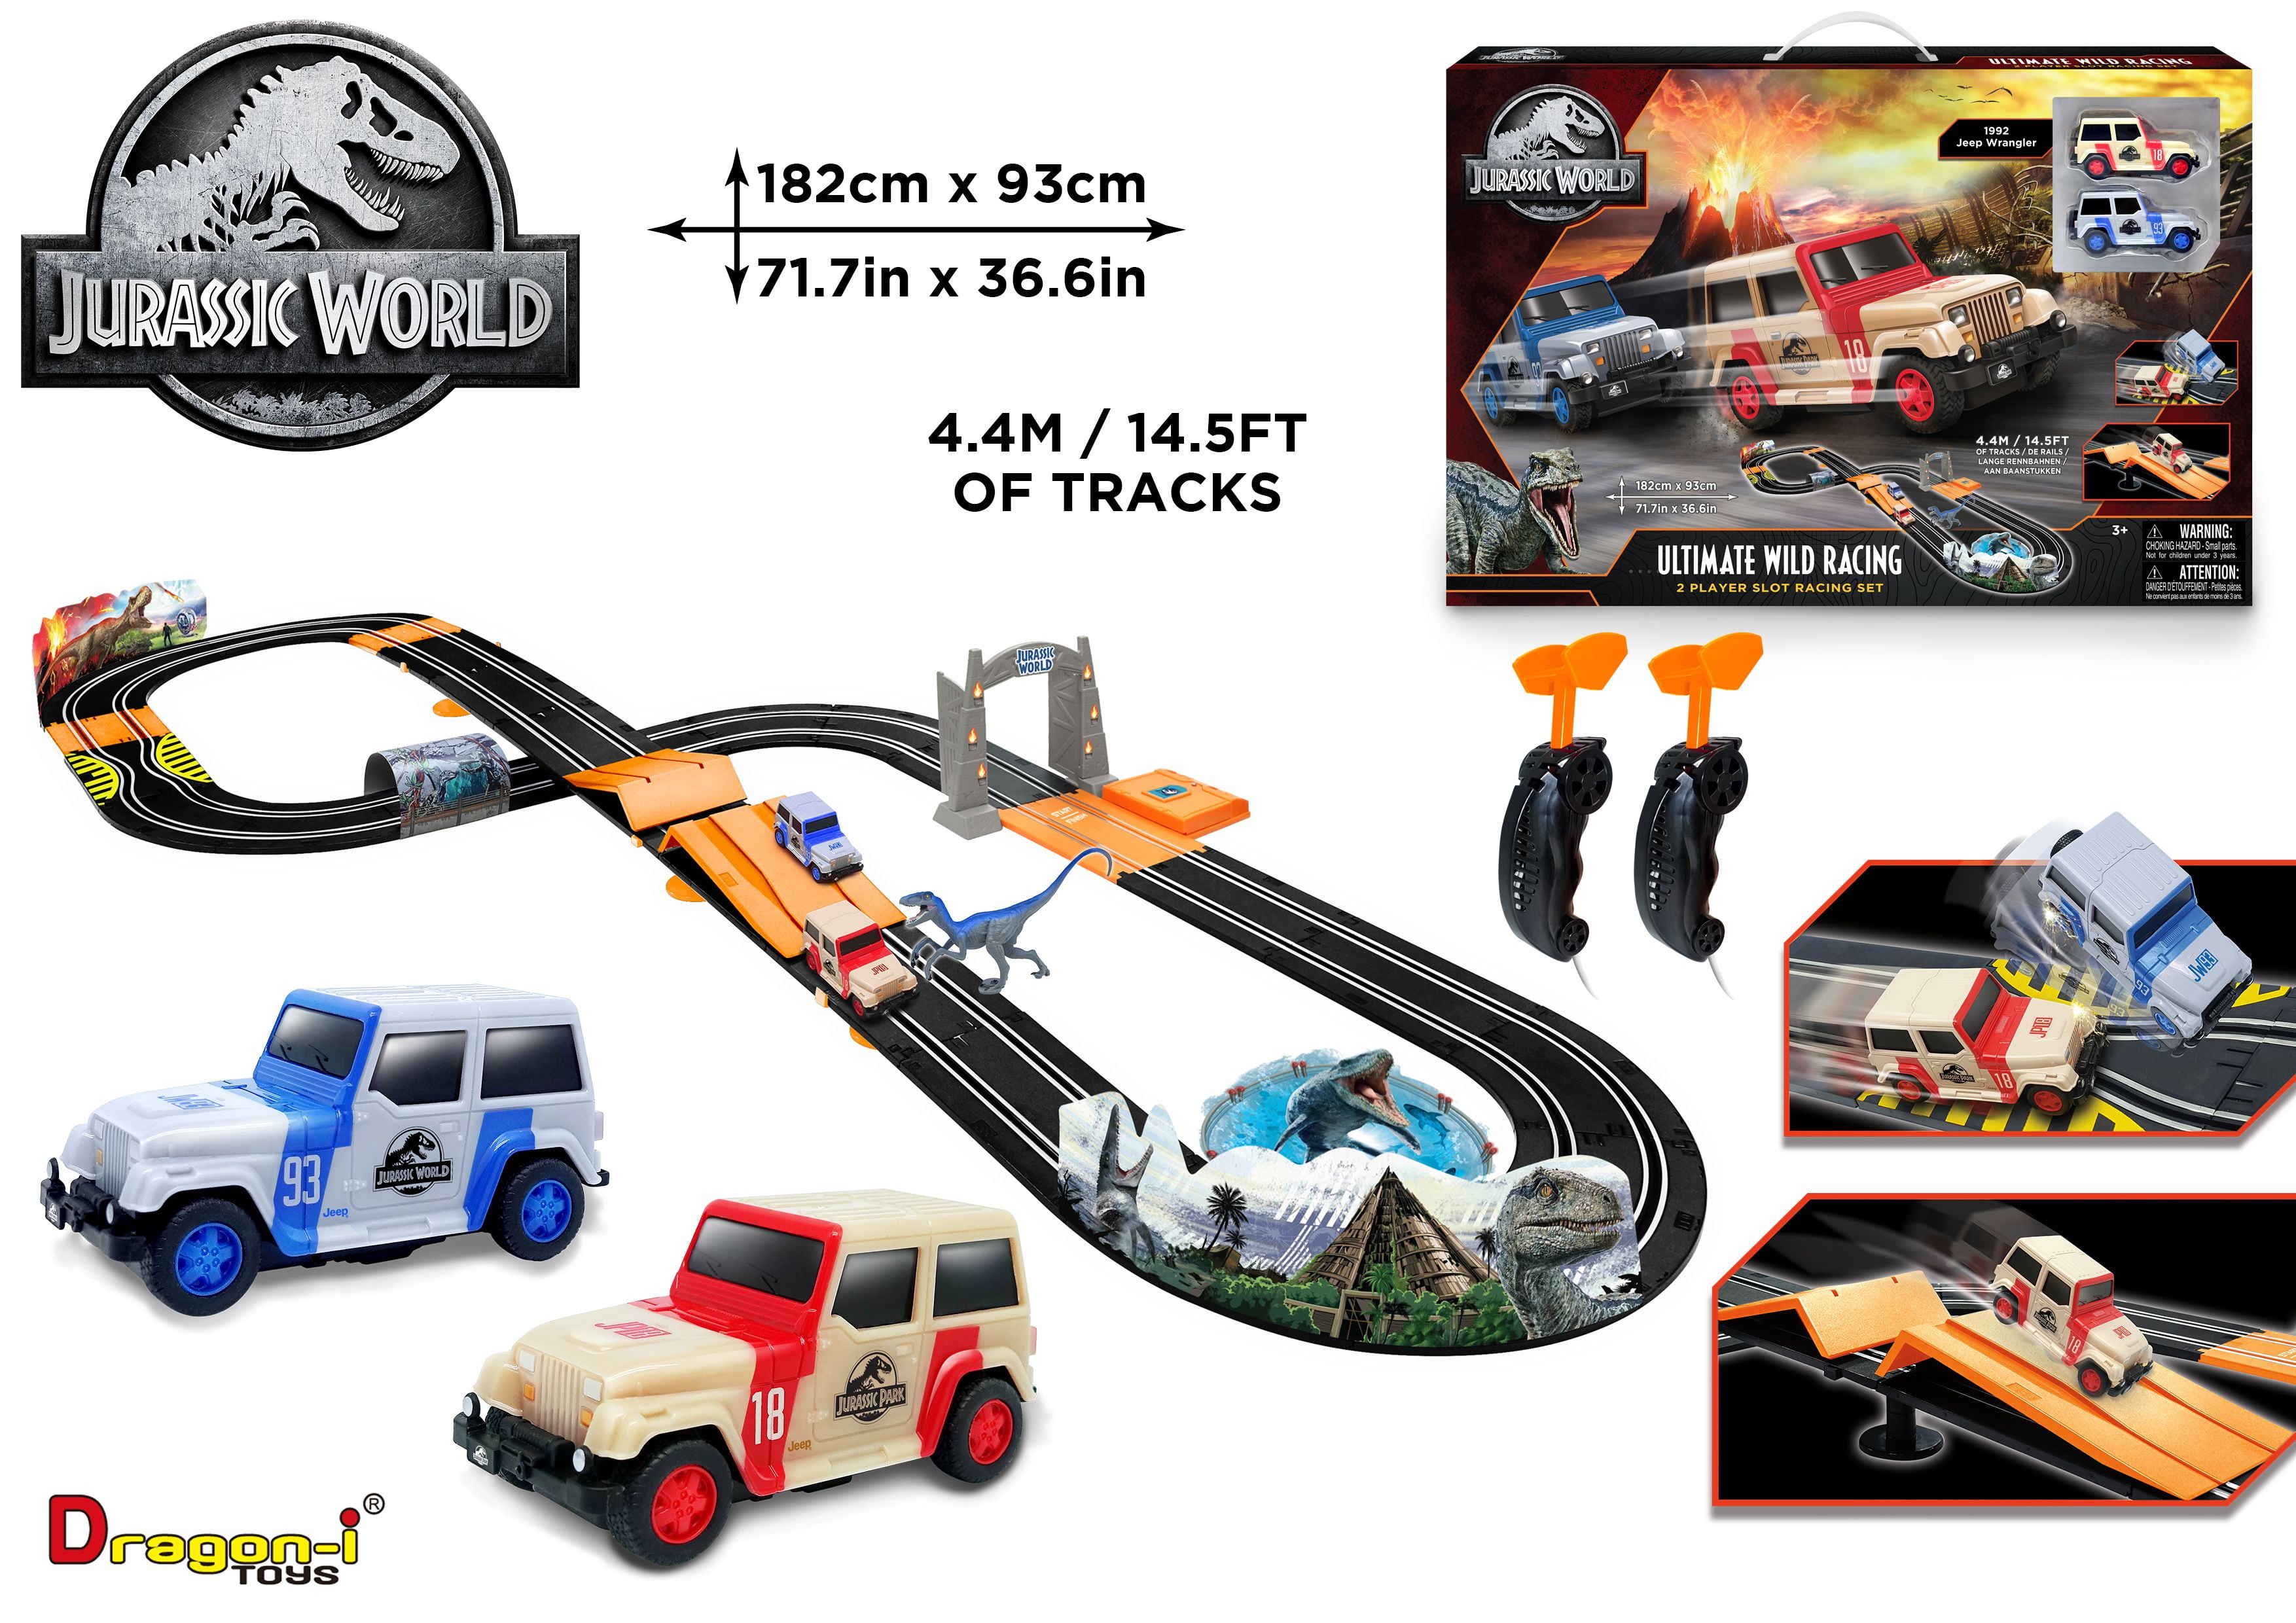 Jurassic World - Ultimate Wild Race Set  Scale: 1:43  Track Length: 4.4m (14.5ft.) $8.23 at Walmart